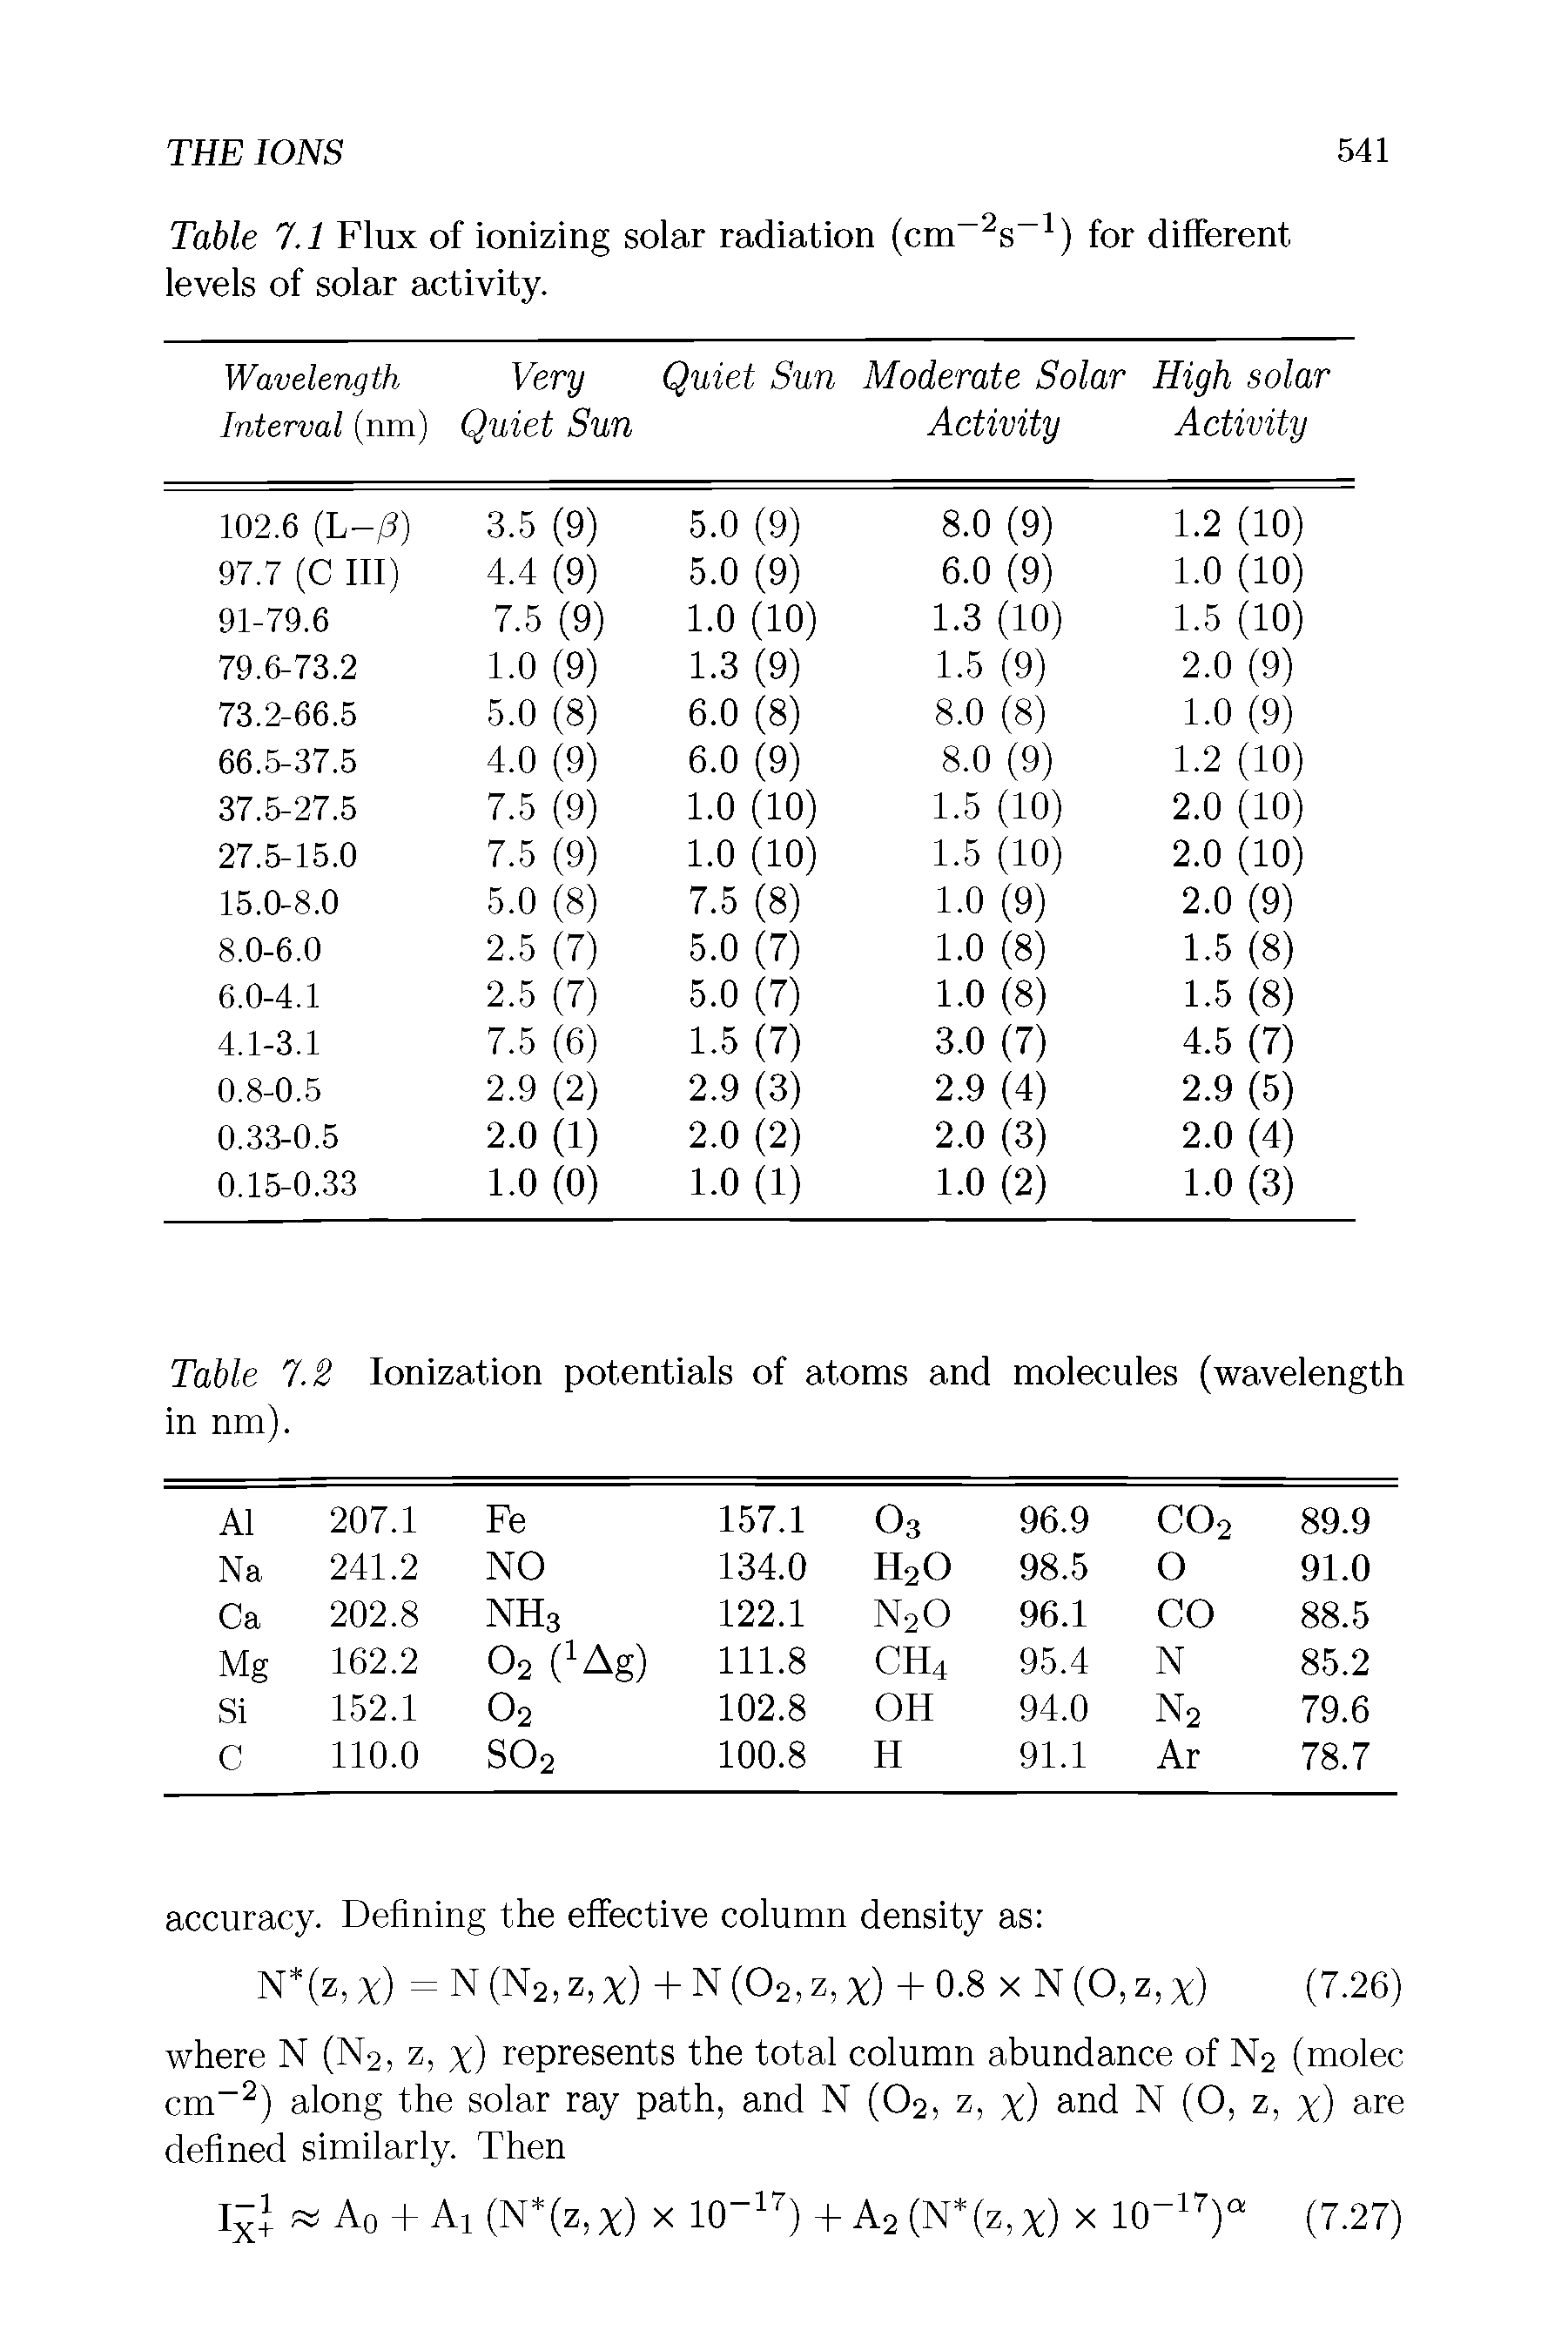 Table 7.2 Ionization potentials of atoms and molecules (wavelength in nm).